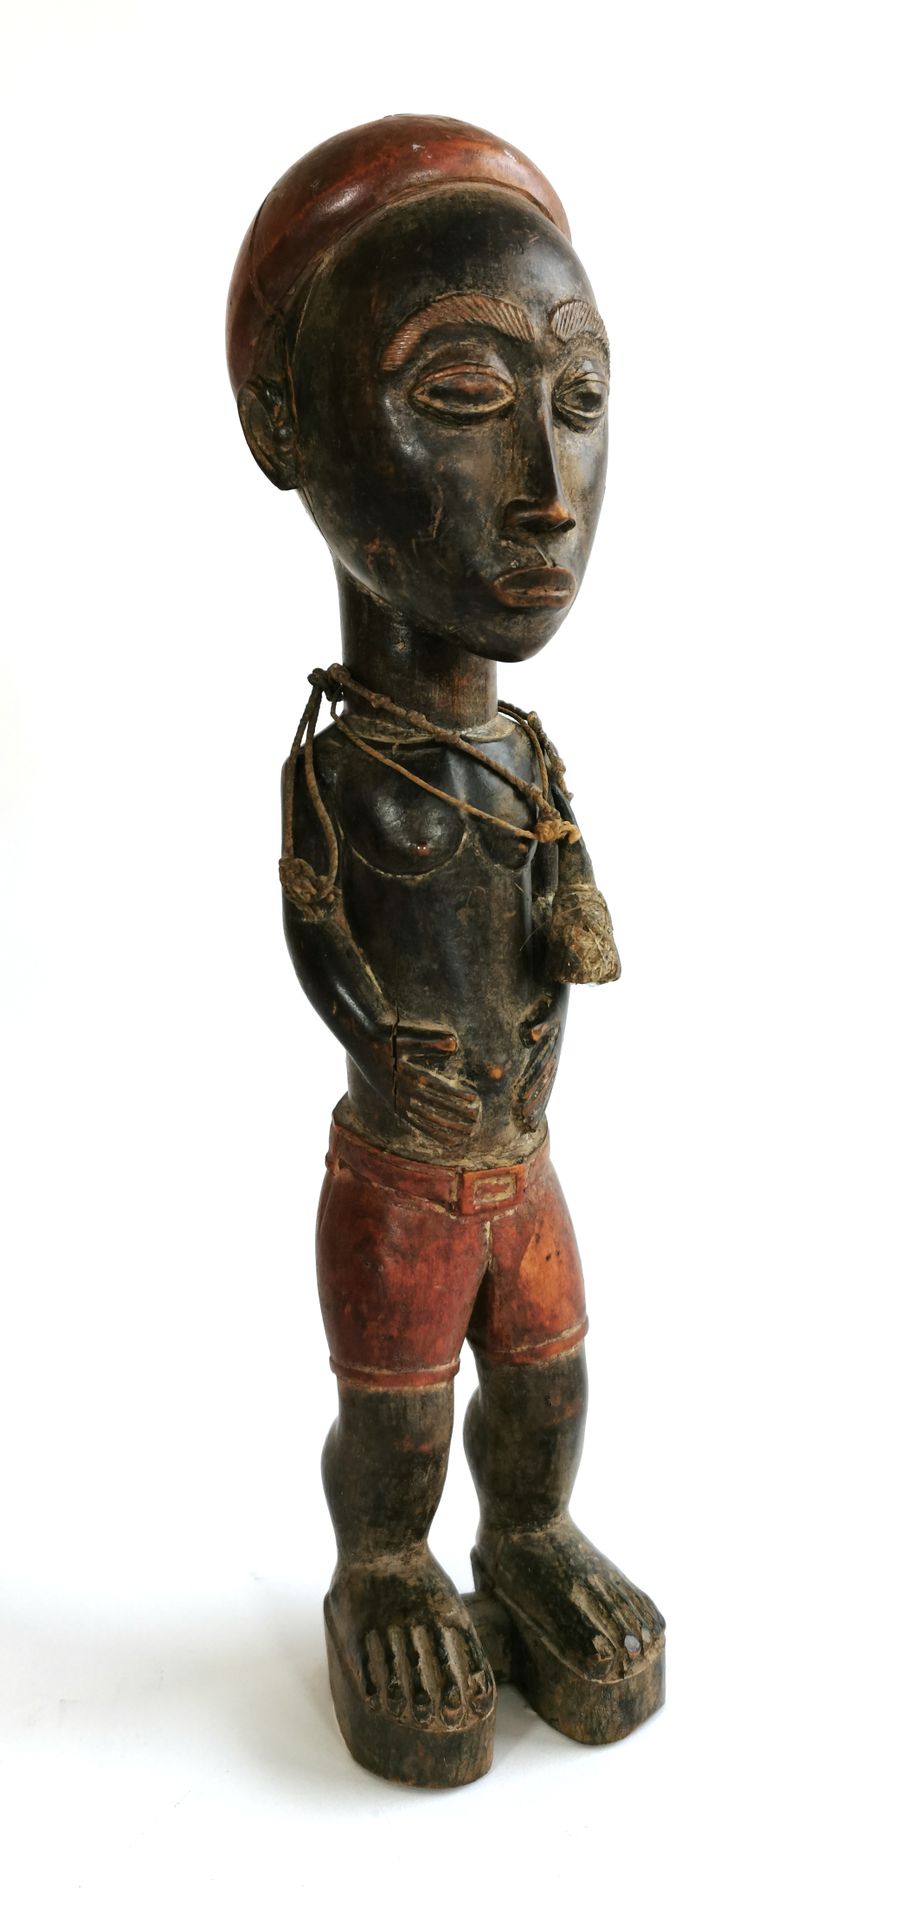 Null BAOULÉ (Ivory Coast)
Statuette in polychrome carved wood
H. 39 cm